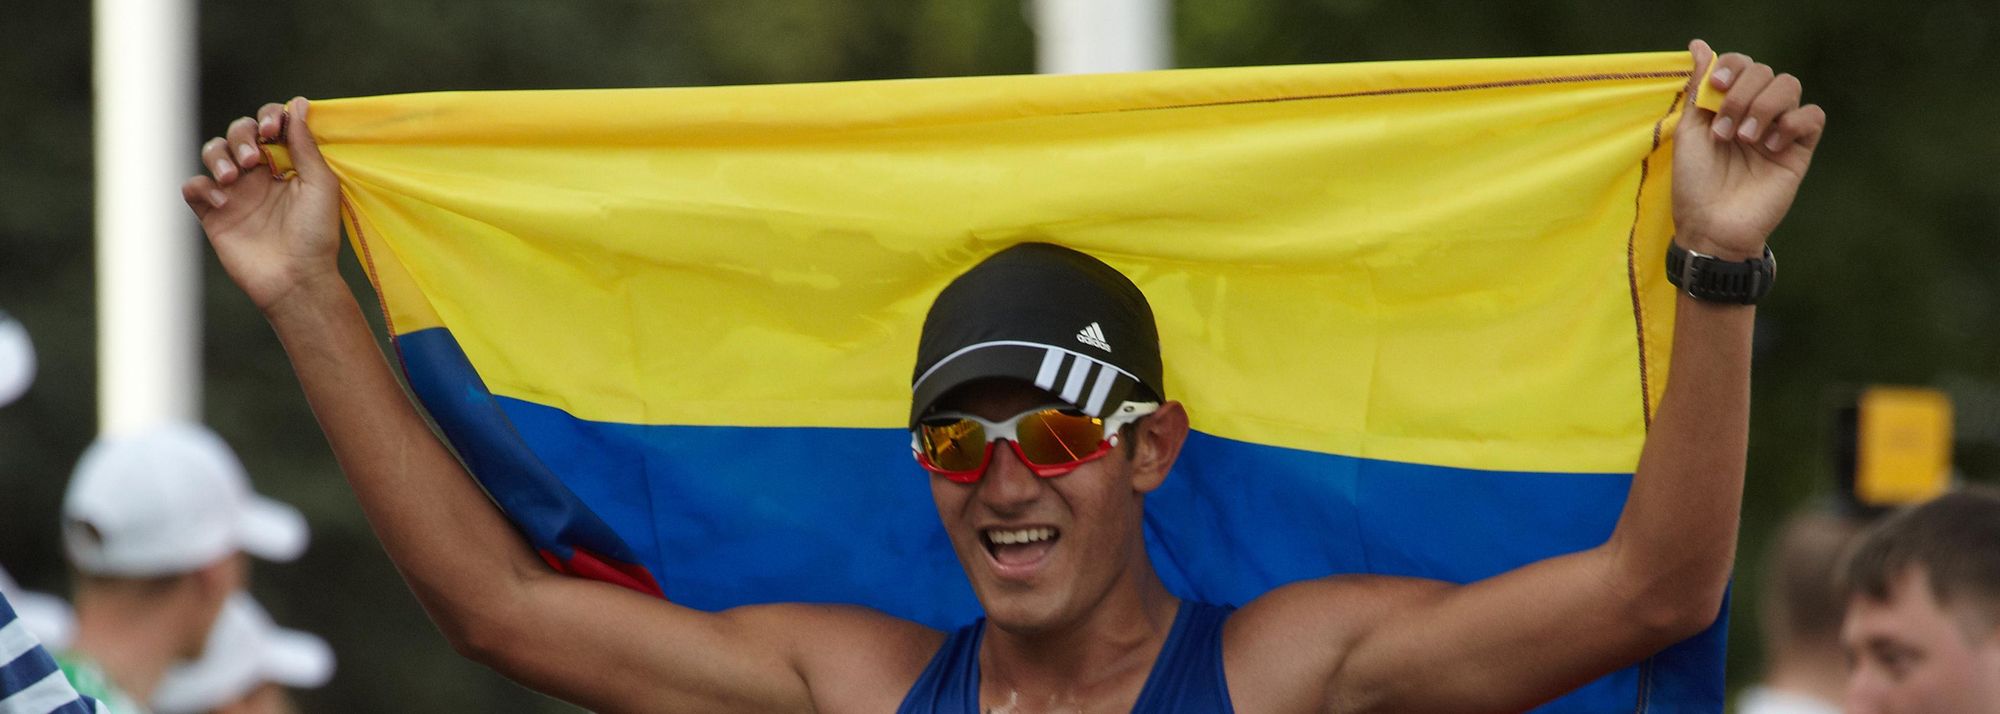 The winner of the junior men’s 10km dedicated his victory to coach Fernando Rozo who passed away in January – and was just as sure he had a bit of divine help as well.